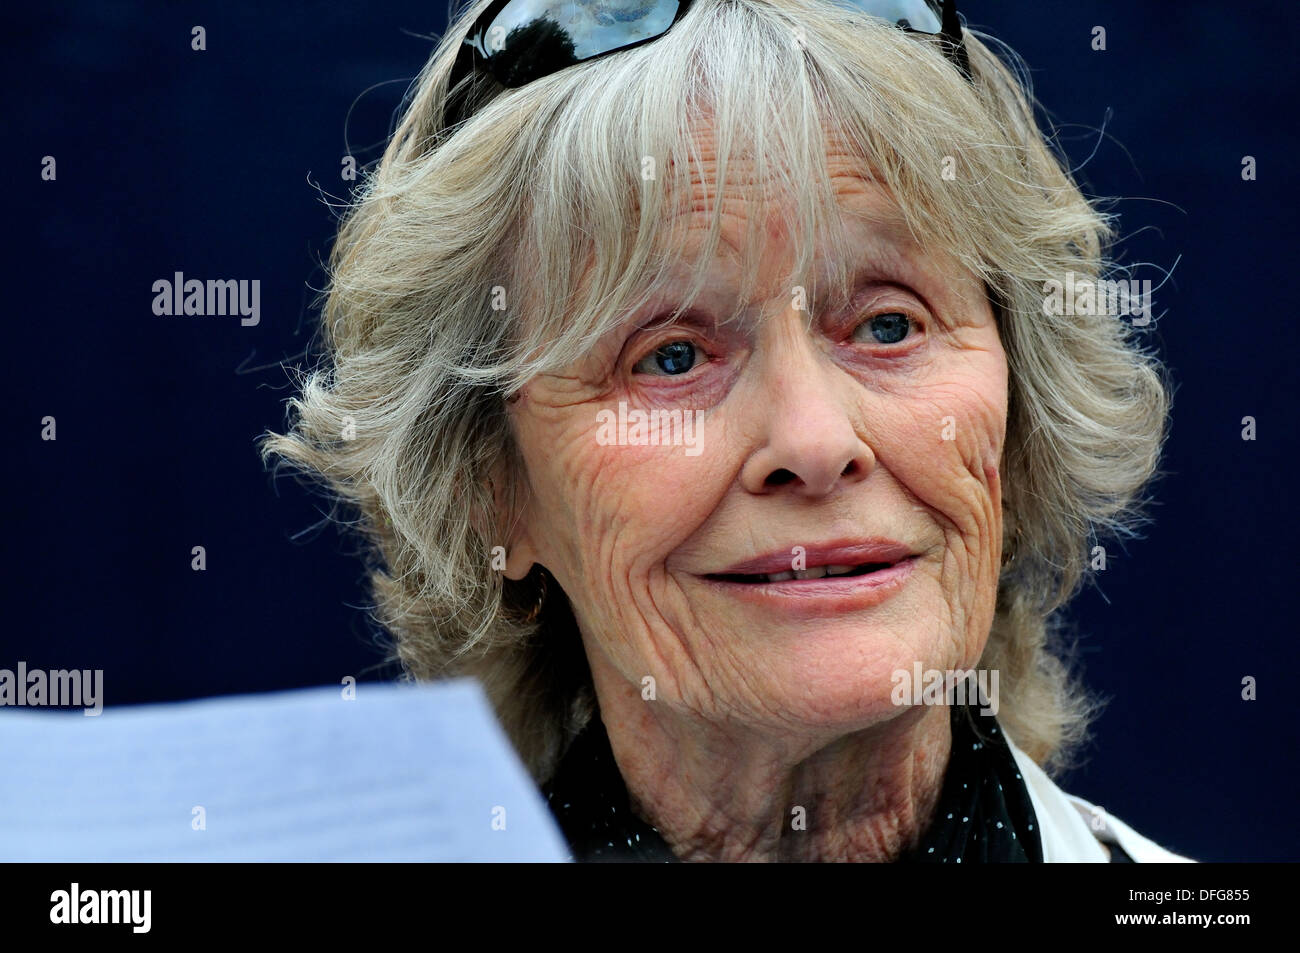 Virginia McKenna (actress and founder of the Born Free foundation) speaking against the UK badger cull., 2013 Stock Photo